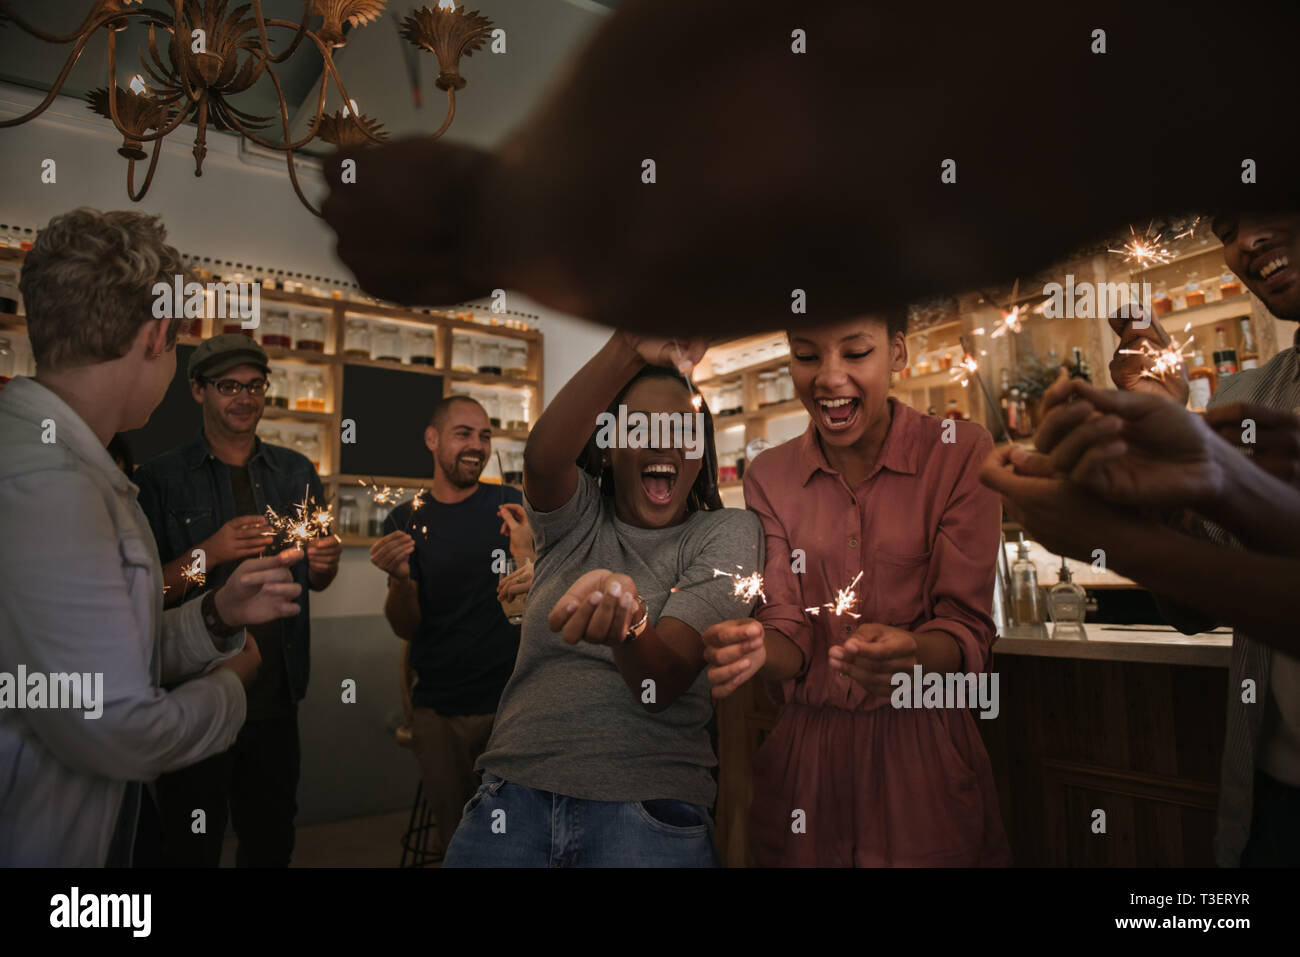 Laughing friends celebrating with sparklers together in a bar Stock Photo